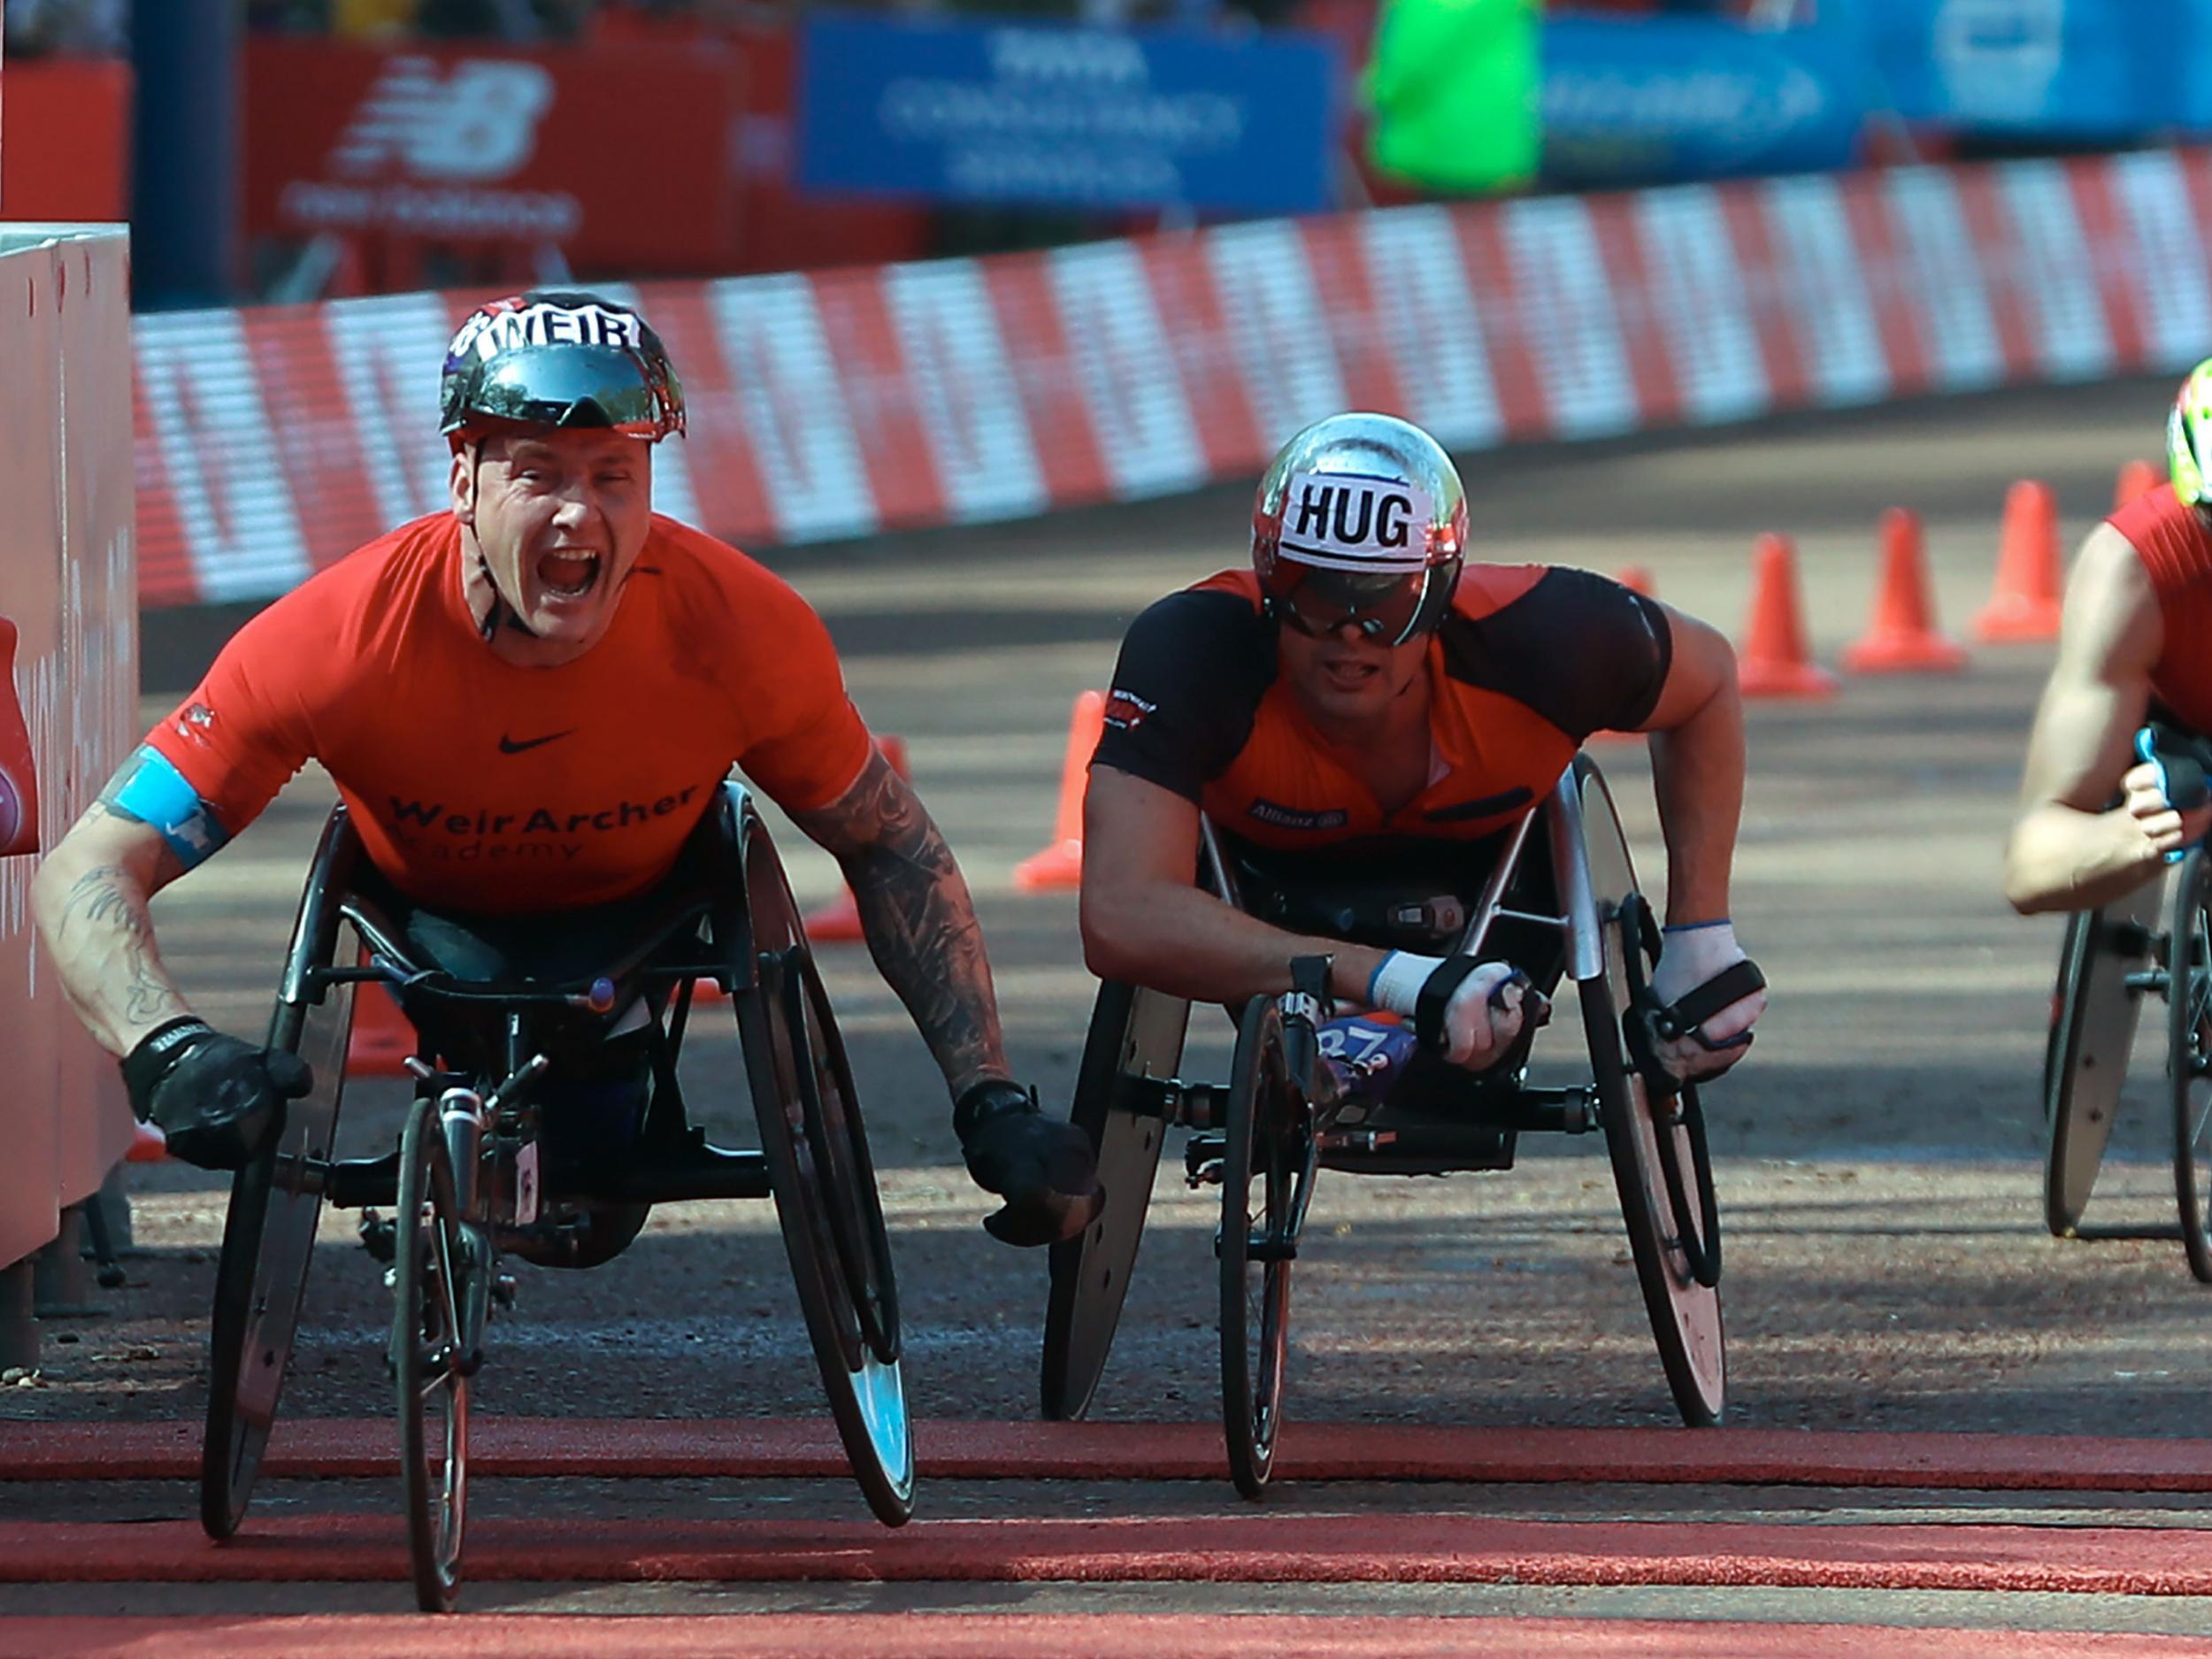 David Weir won the men's wheelchair race for the eighth time